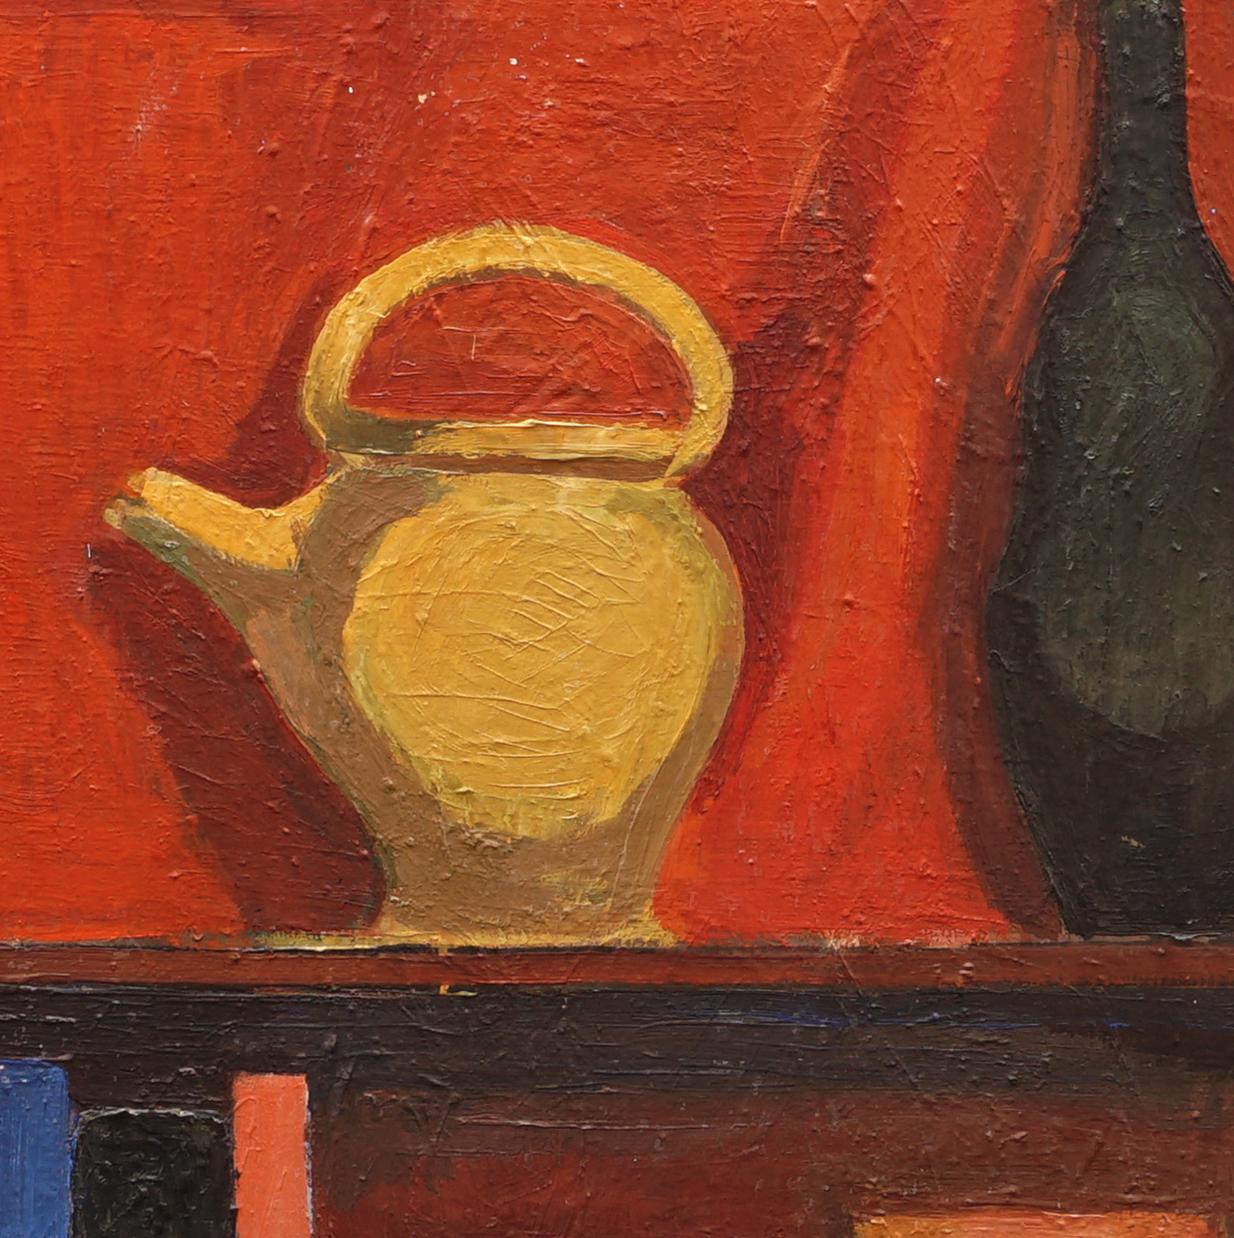 Hermann Stilling, 1925-96, oil on wood.
Composition with vase, jugs, sculpture, books etc.
Signed circa 1960

Hermann Stilling was educated from the Royal Danish Academy 1945-51
Today he is represented at Danish museums and the 